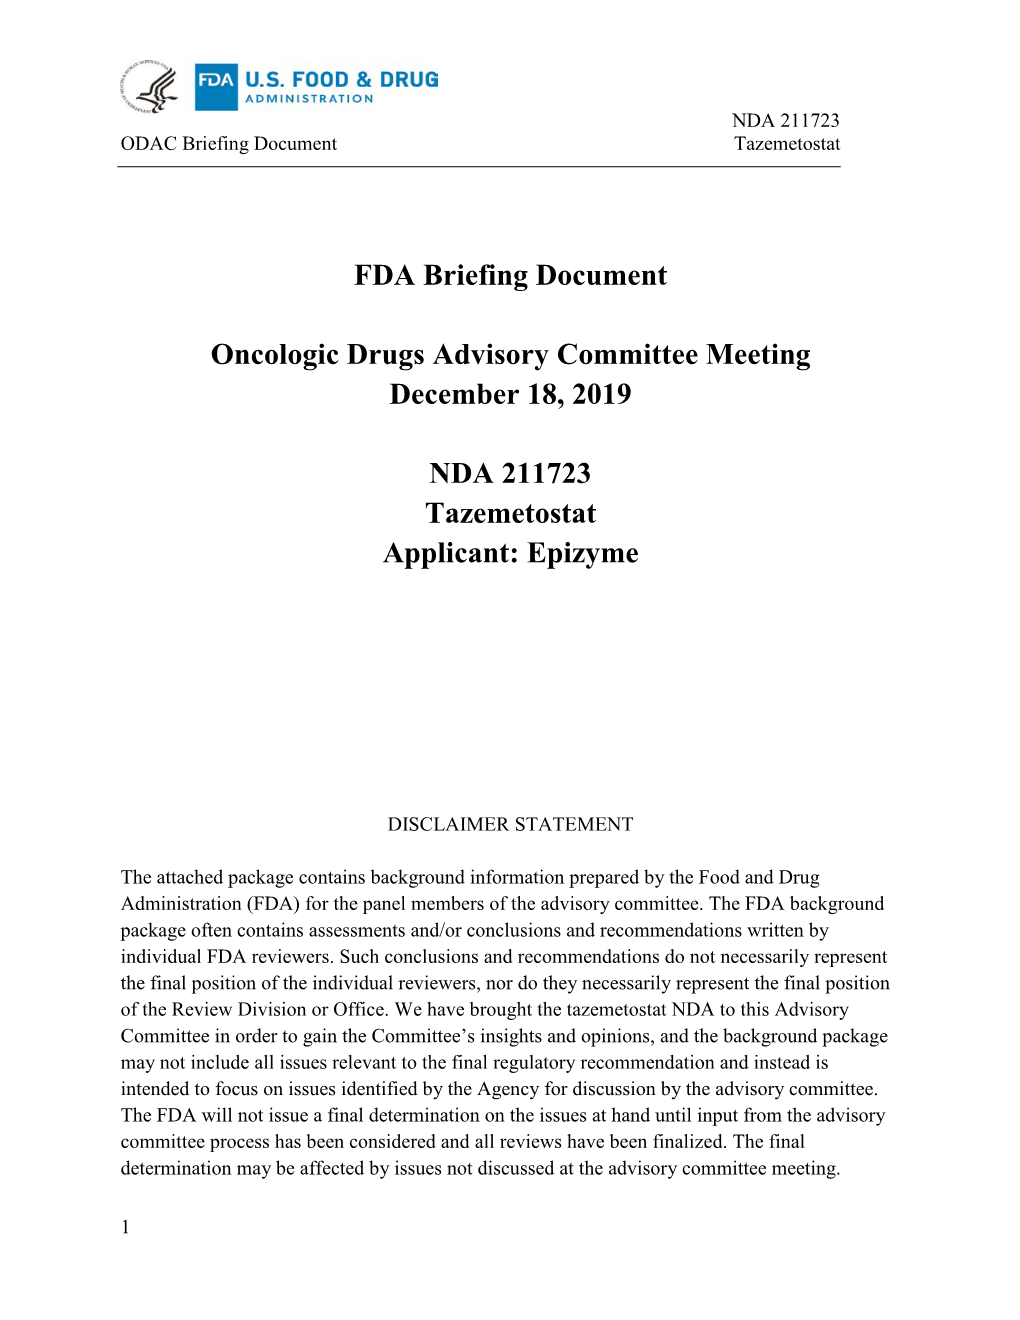 FDA Briefing Document Oncologic Drugs Advisory Committee Meeting